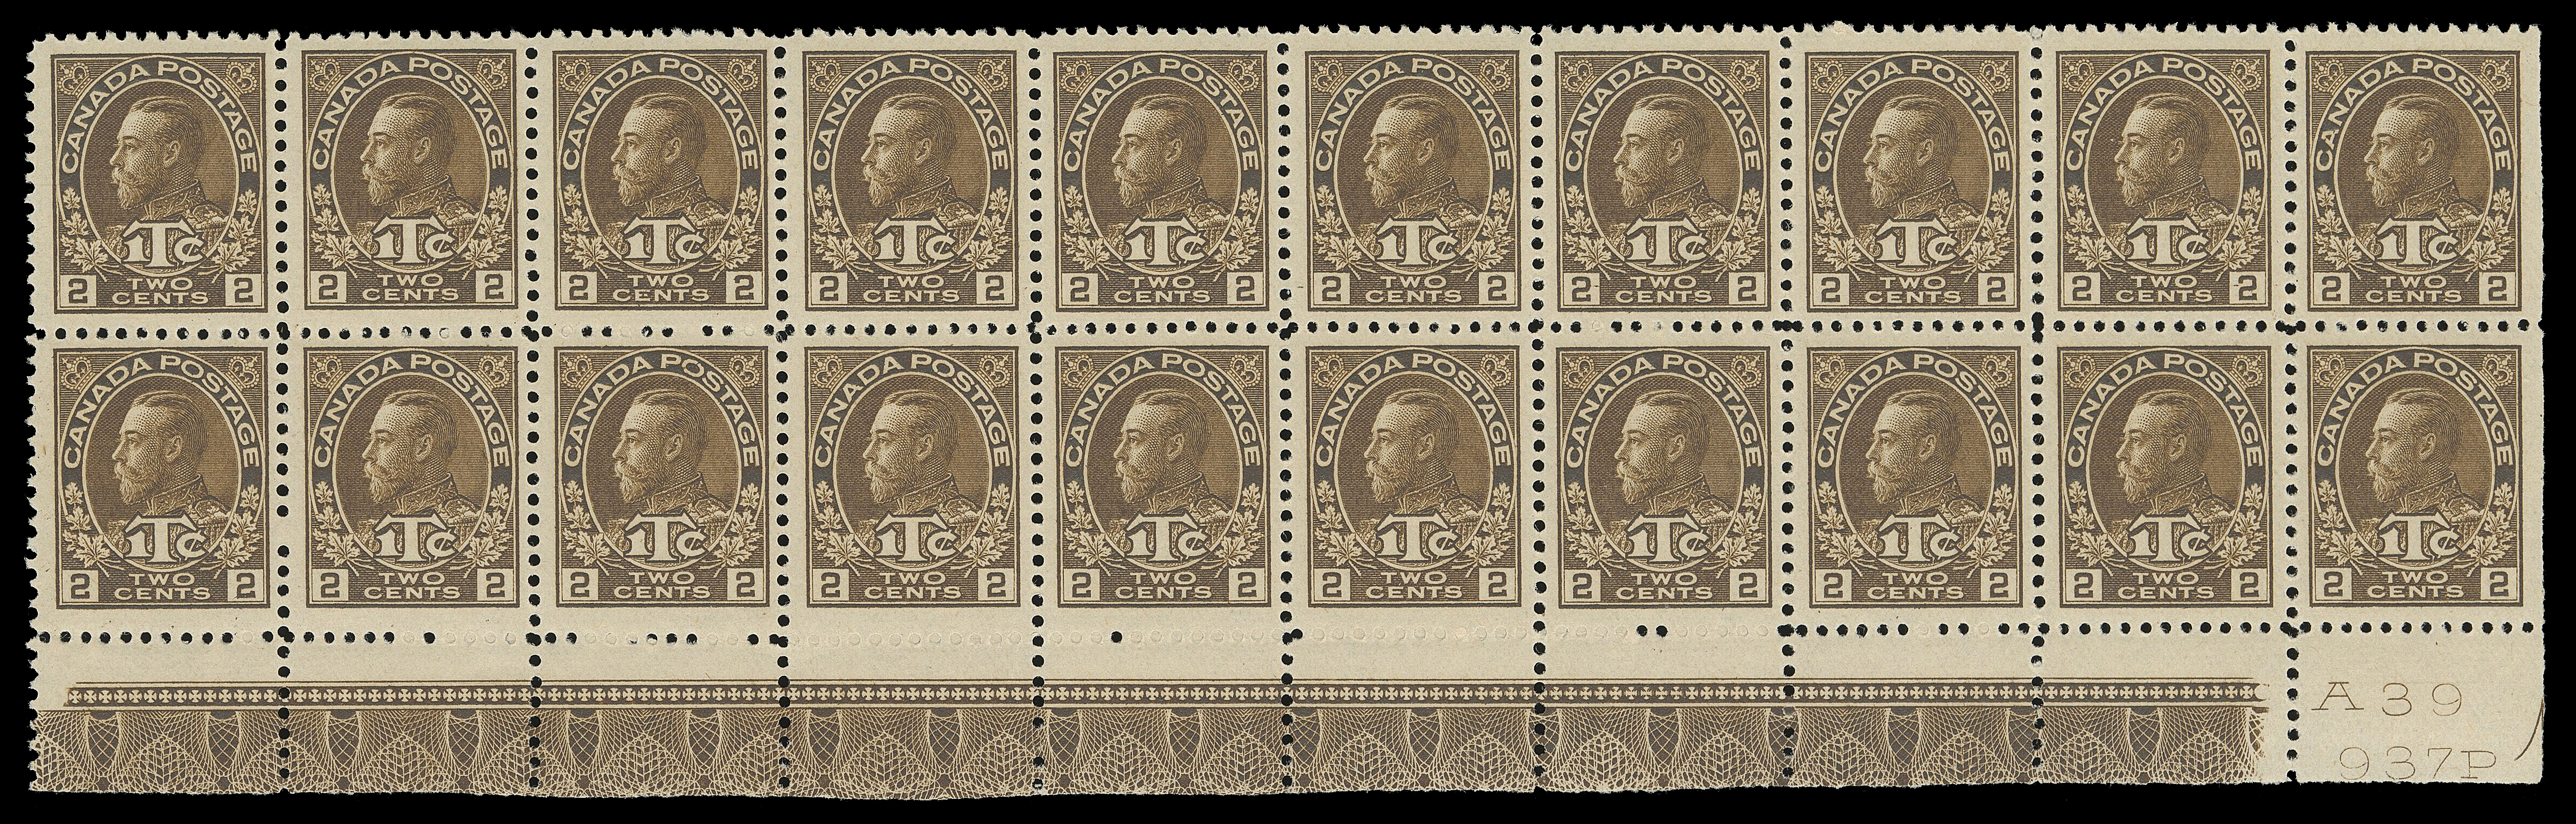 ADMIRAL STAMPS  MR4 shade,An impressive lathework plate imprint block from lower left corner of the sheet, no selvedge at left, in a noticeably dark rich shade, fresh and well centered, showing plate "A39" and printing order number "937P" below Position 100 and a strong, full Type A lathework on others, DOUBLE lathework (17mm wide) visible below Positions 96 & 97, hinged on lower corner stamps leaving eighteen NH, VF (Unitrade cat. $5,660)